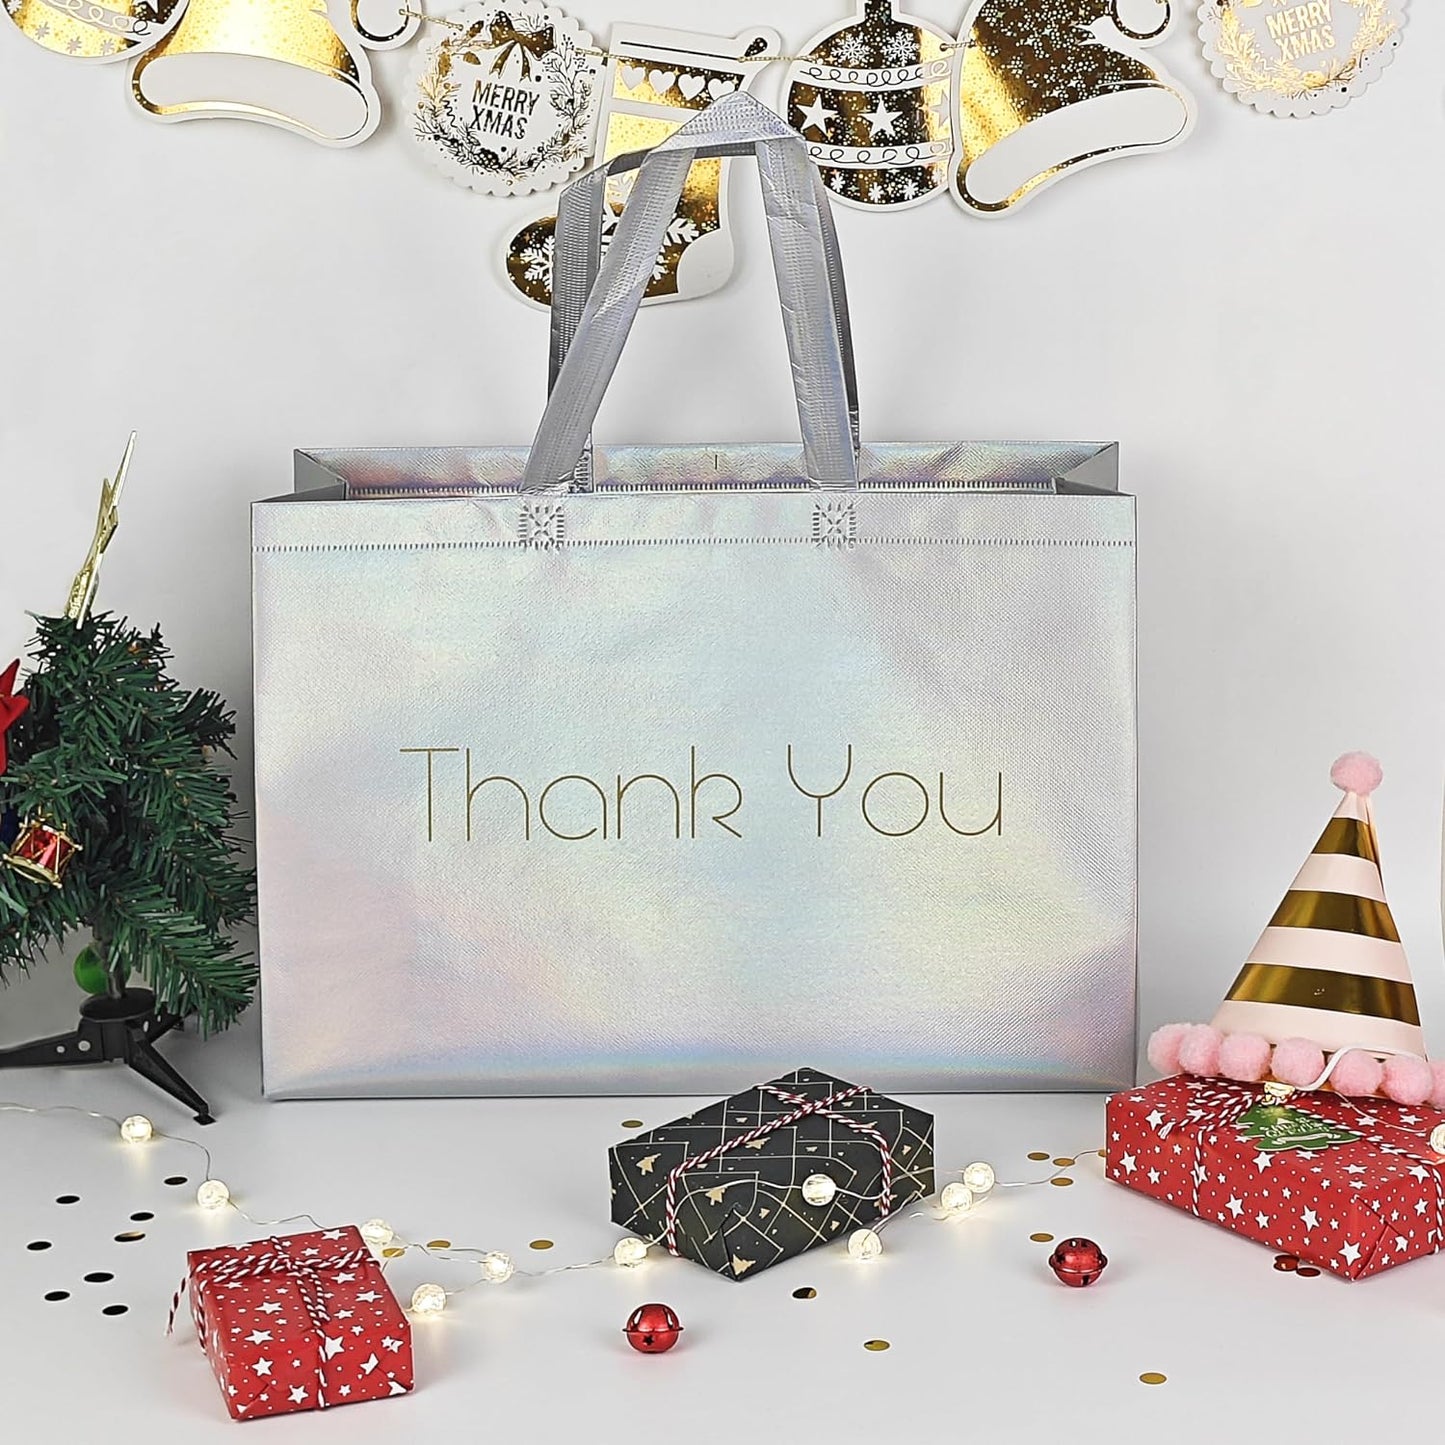 Extra Large Thank You Gift Bags - Set of 24 Bags - 16x12 Inches -Reusable Iridescent Shiny Holographic Boutique Bags With Handles - XL Gift Bags - Perfect for Small Business 16x6x12